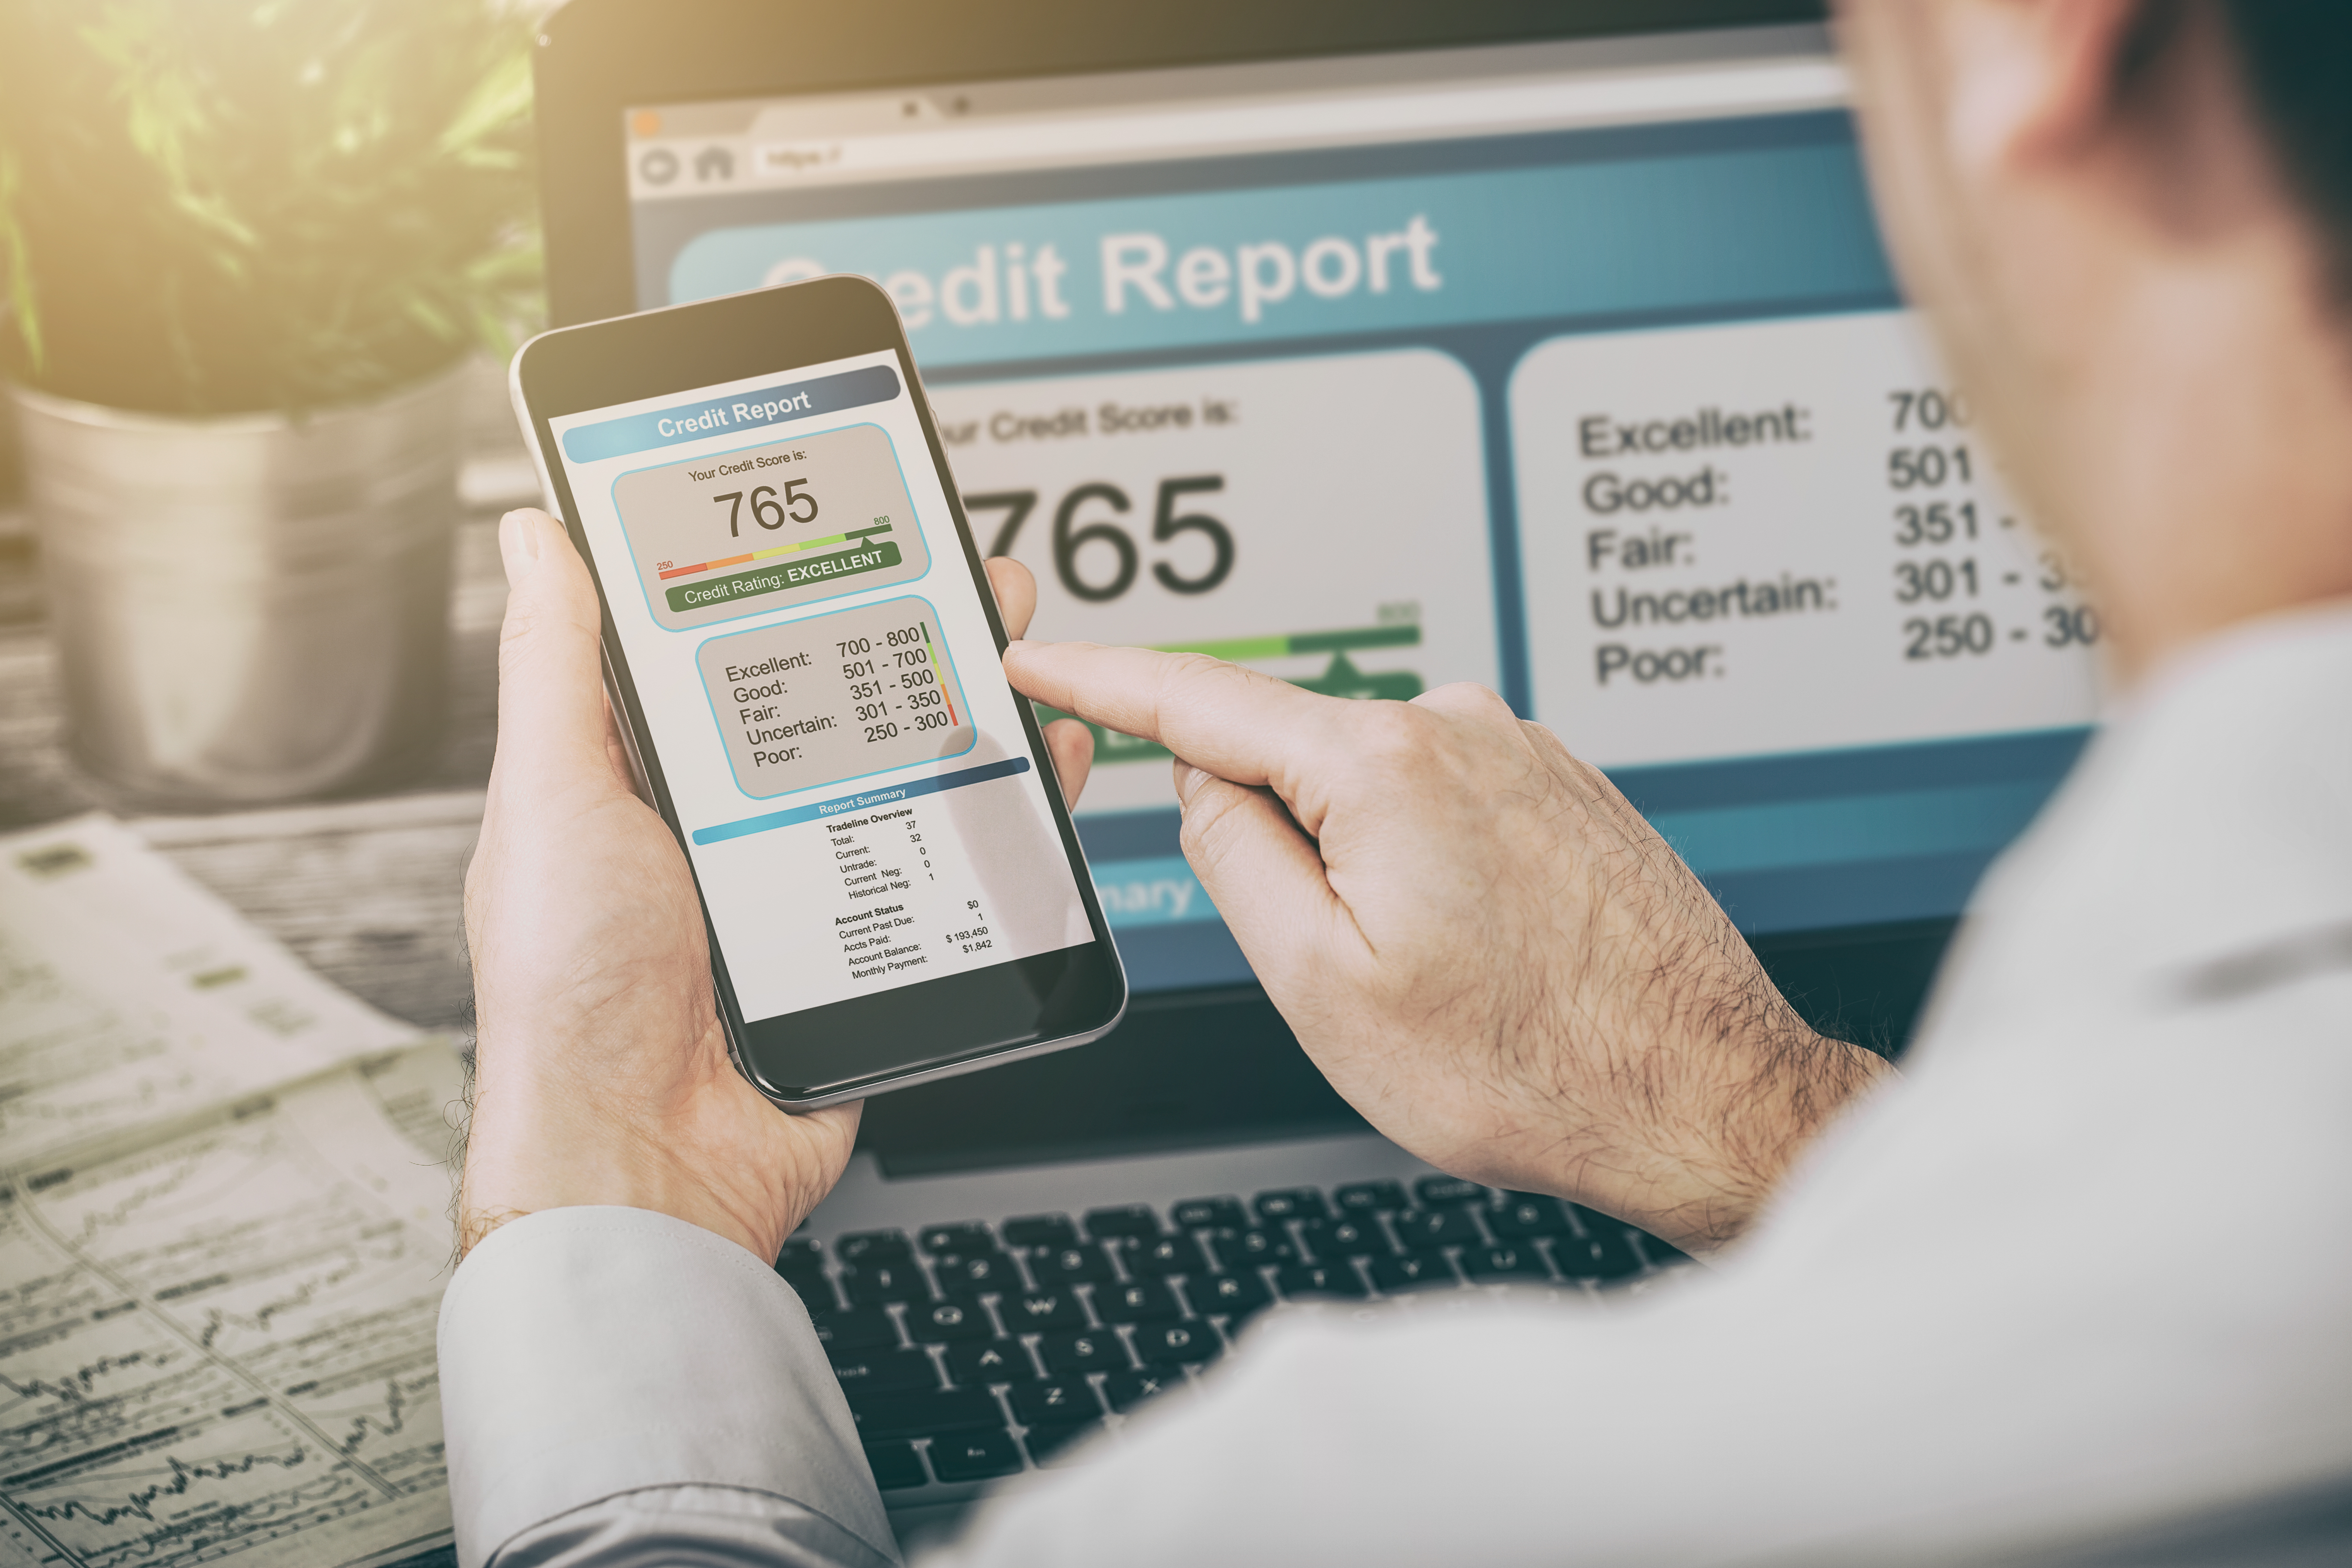 How to Check Credit Score for Free Without Affecting Your Credit